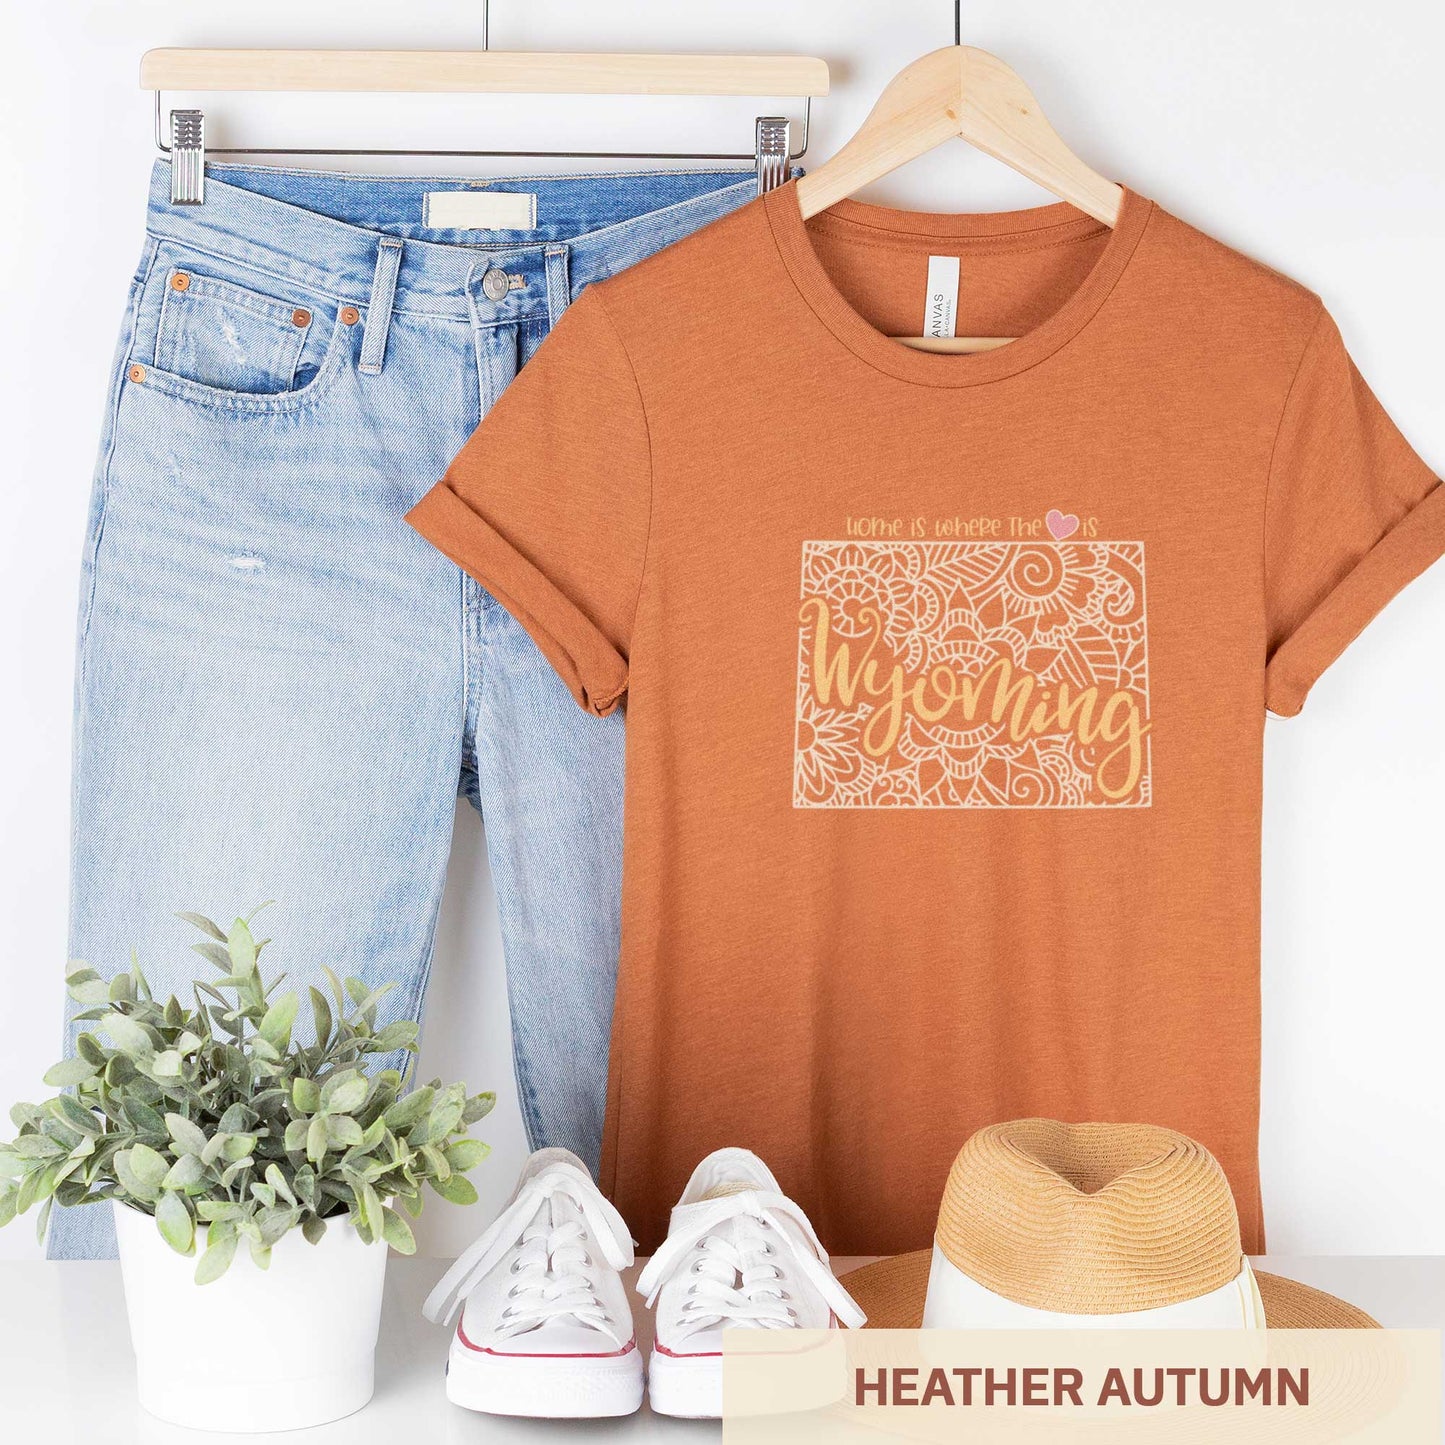 A hanging heather autumn Bella Canvas t-shirt featuring a mandala in the shape of Wyoming with the words home is where the heart is.